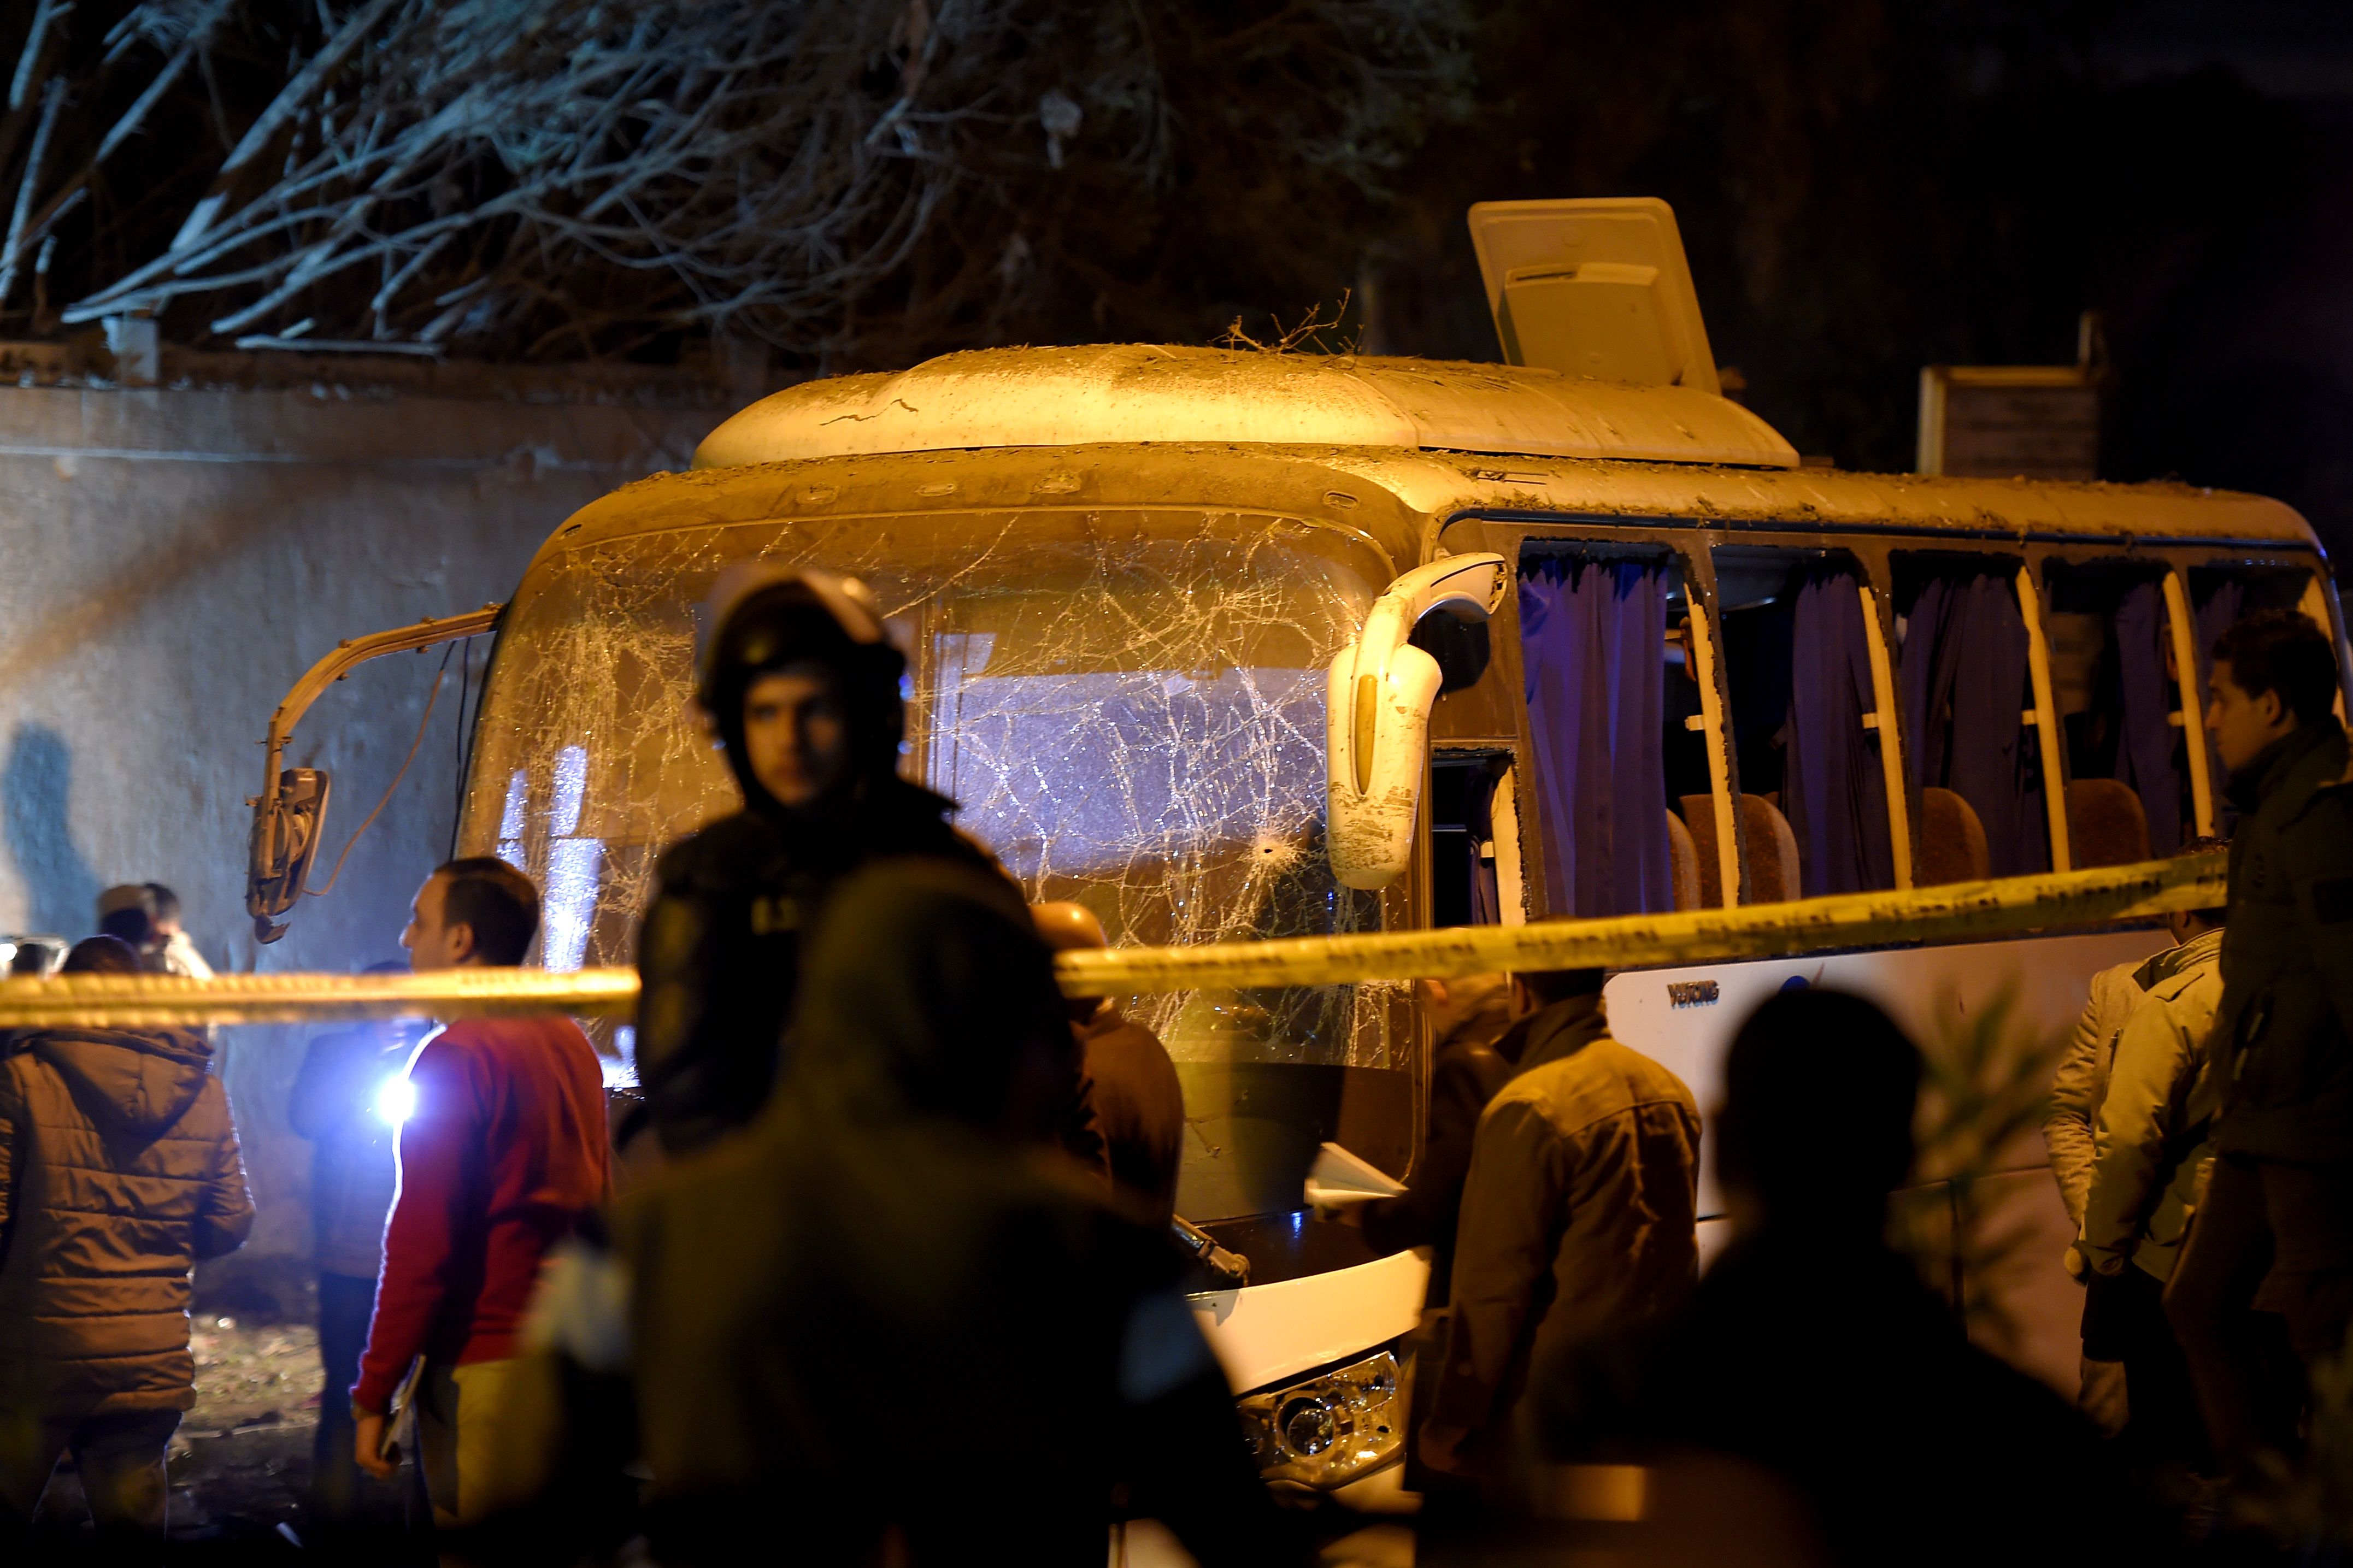 This picture taken on December 28, 2018 shows a view of a tourist bus which was attacked in Giza province south of the Egyptian capital Cairo. (MOHAMED EL-SHAHED/AFP/Getty Images)